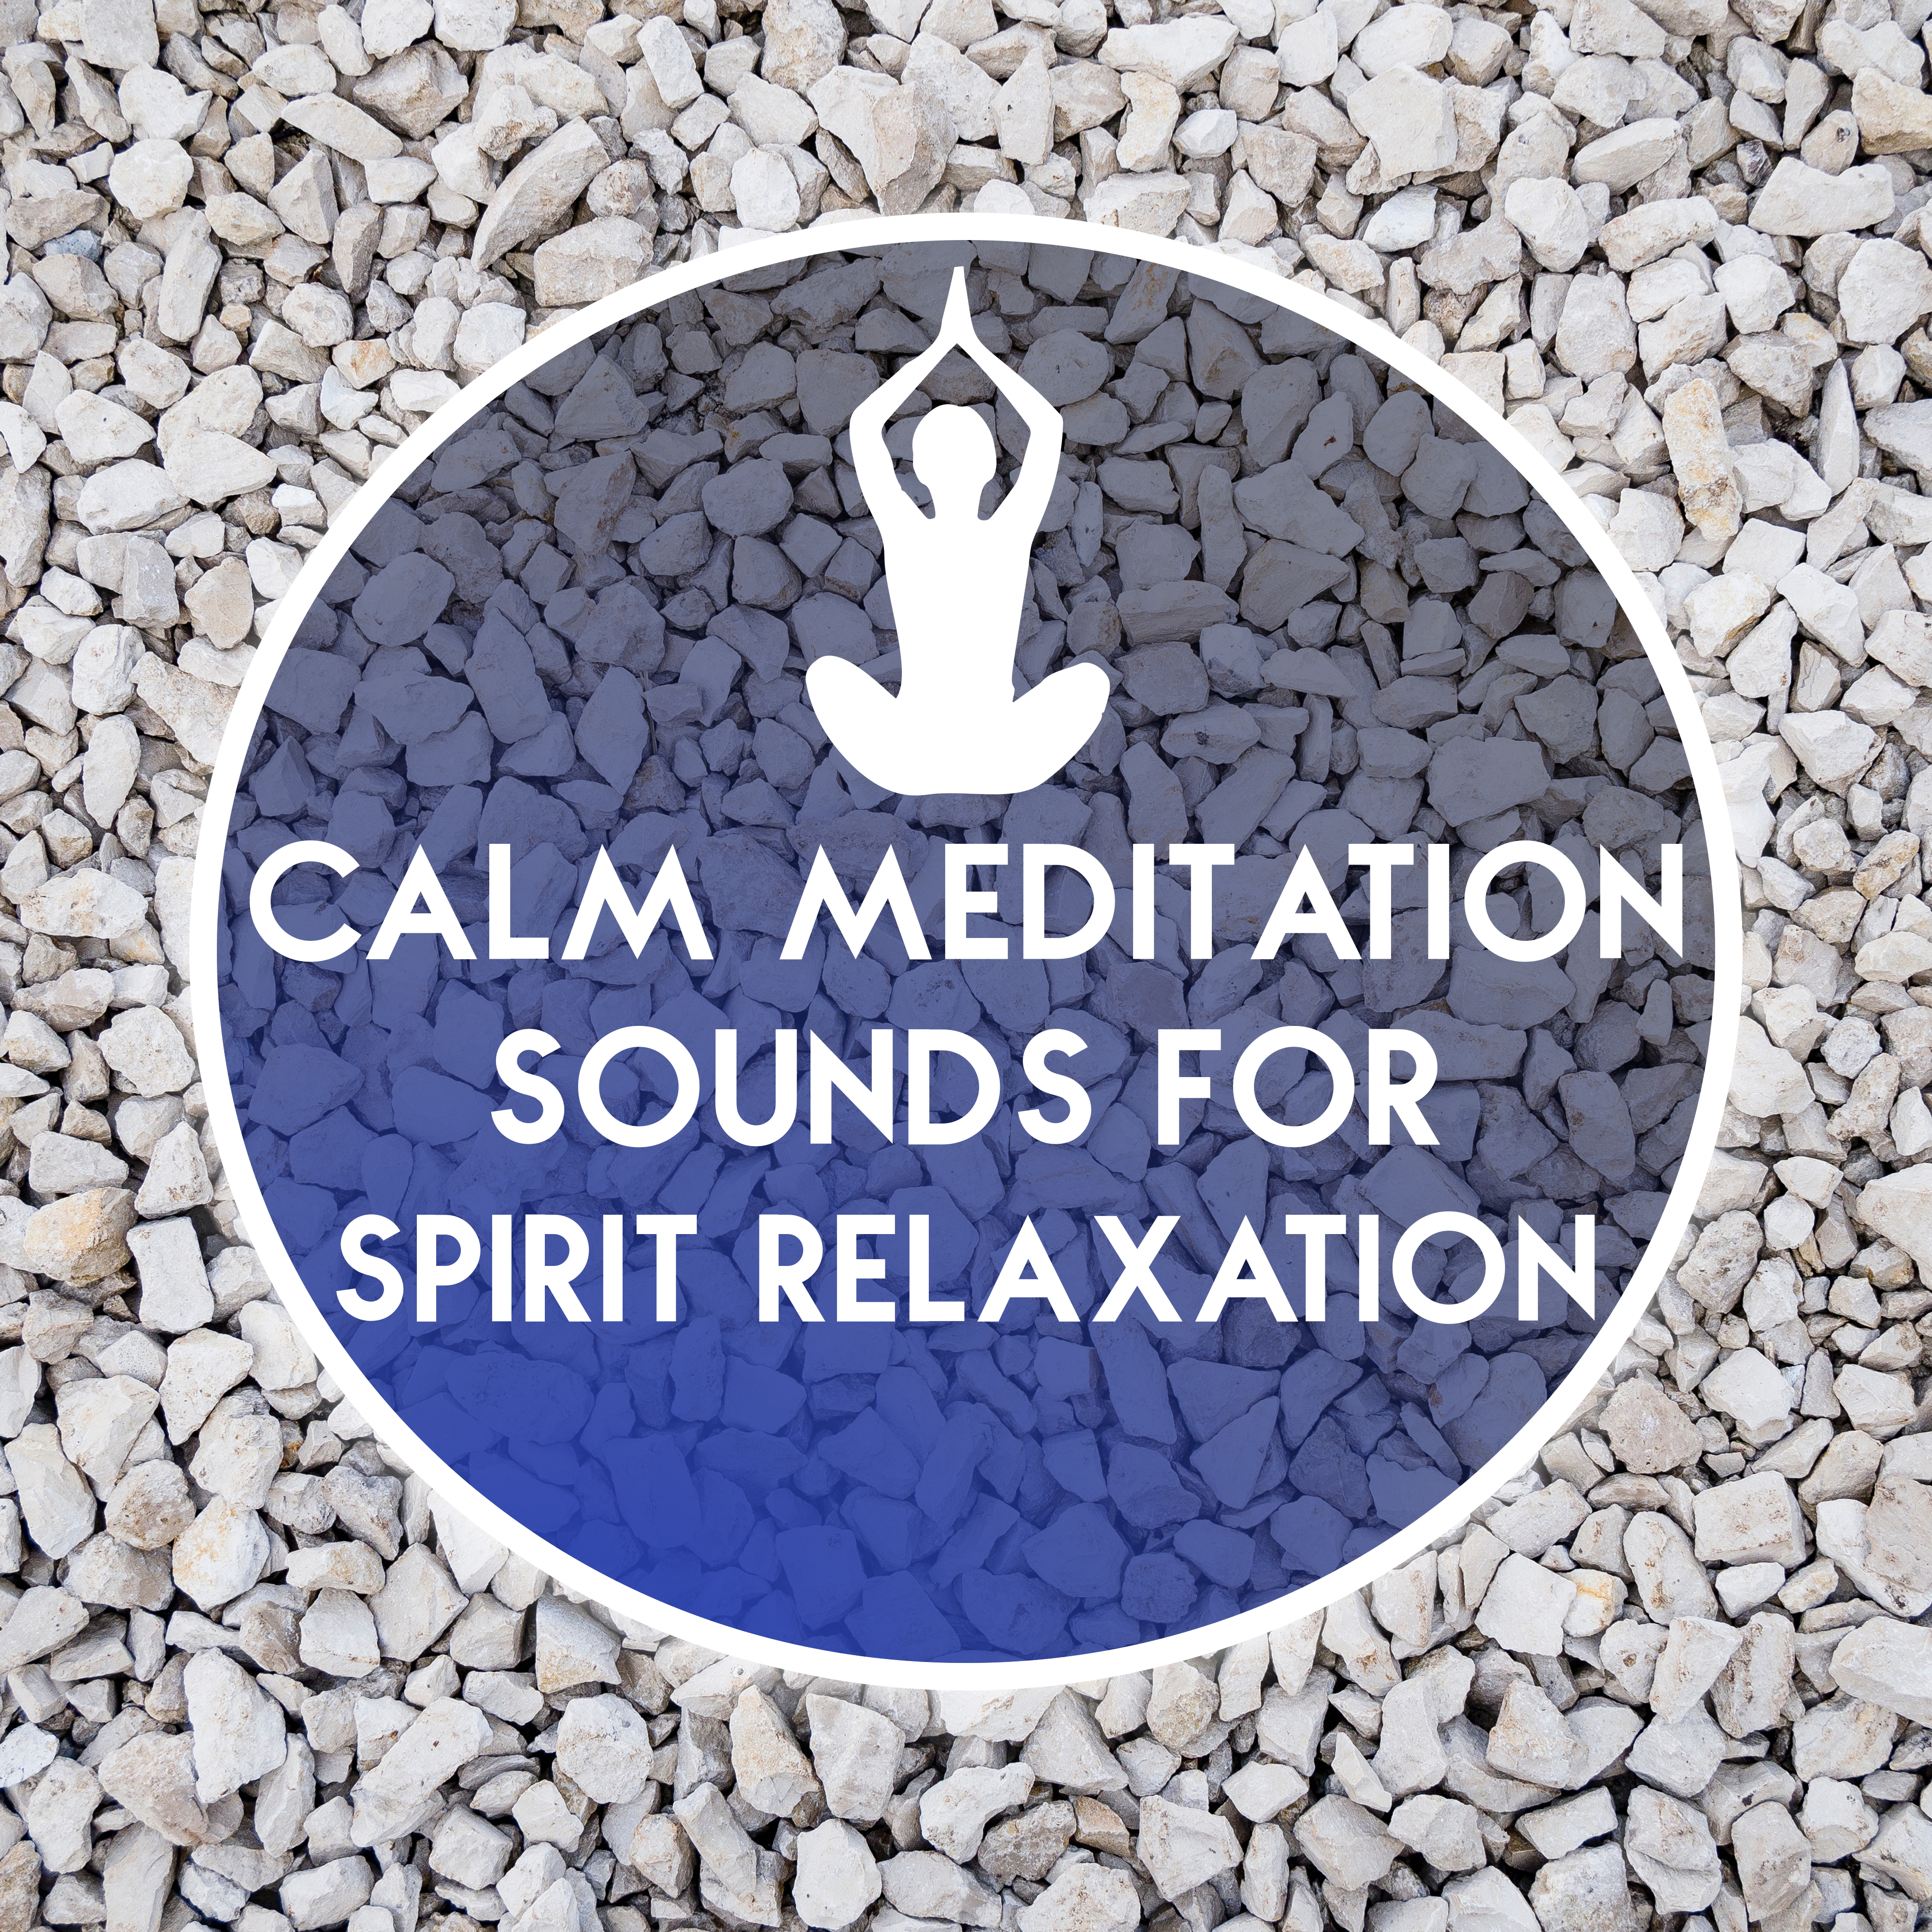 Calm Meditation Sounds for Spirit Relaxation  Easy Listening, Stress Relief, Peaceful Music, Calm Melodies to Meditate